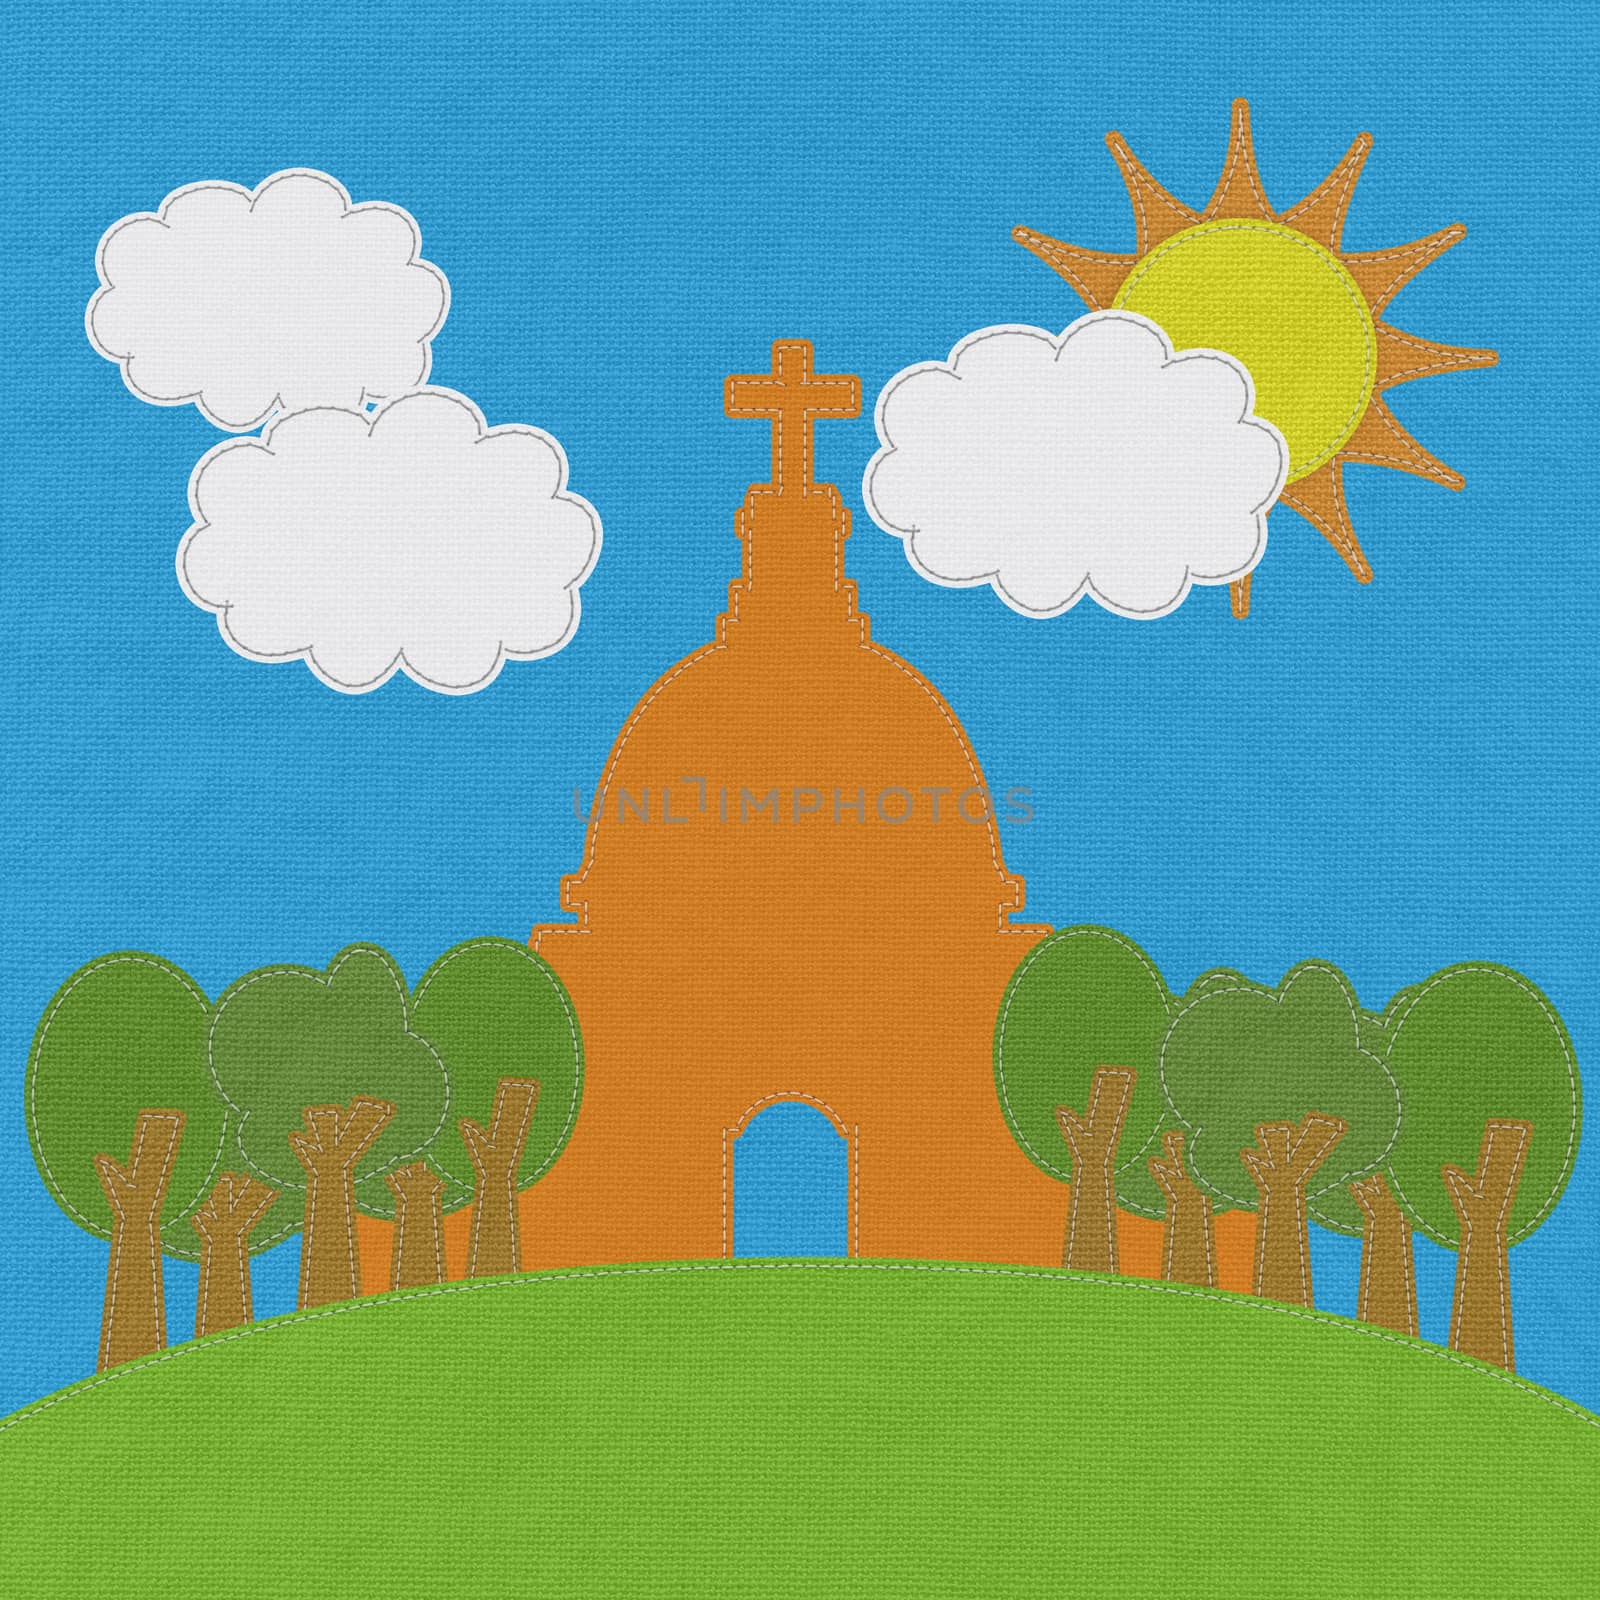 Chruch in stitch style on fabric background